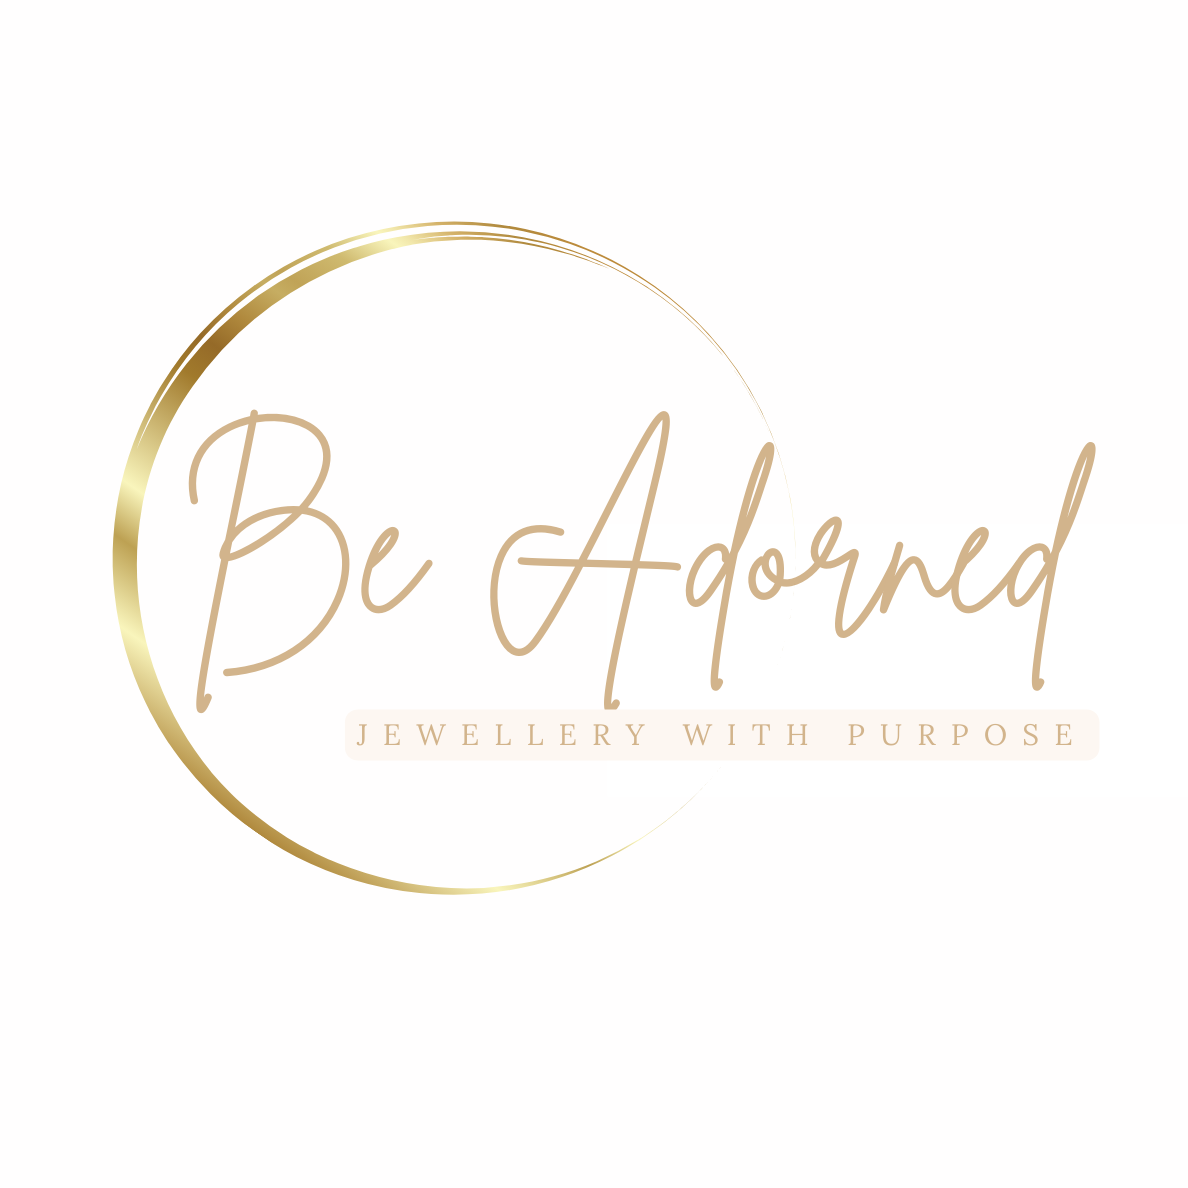 Be Adorned